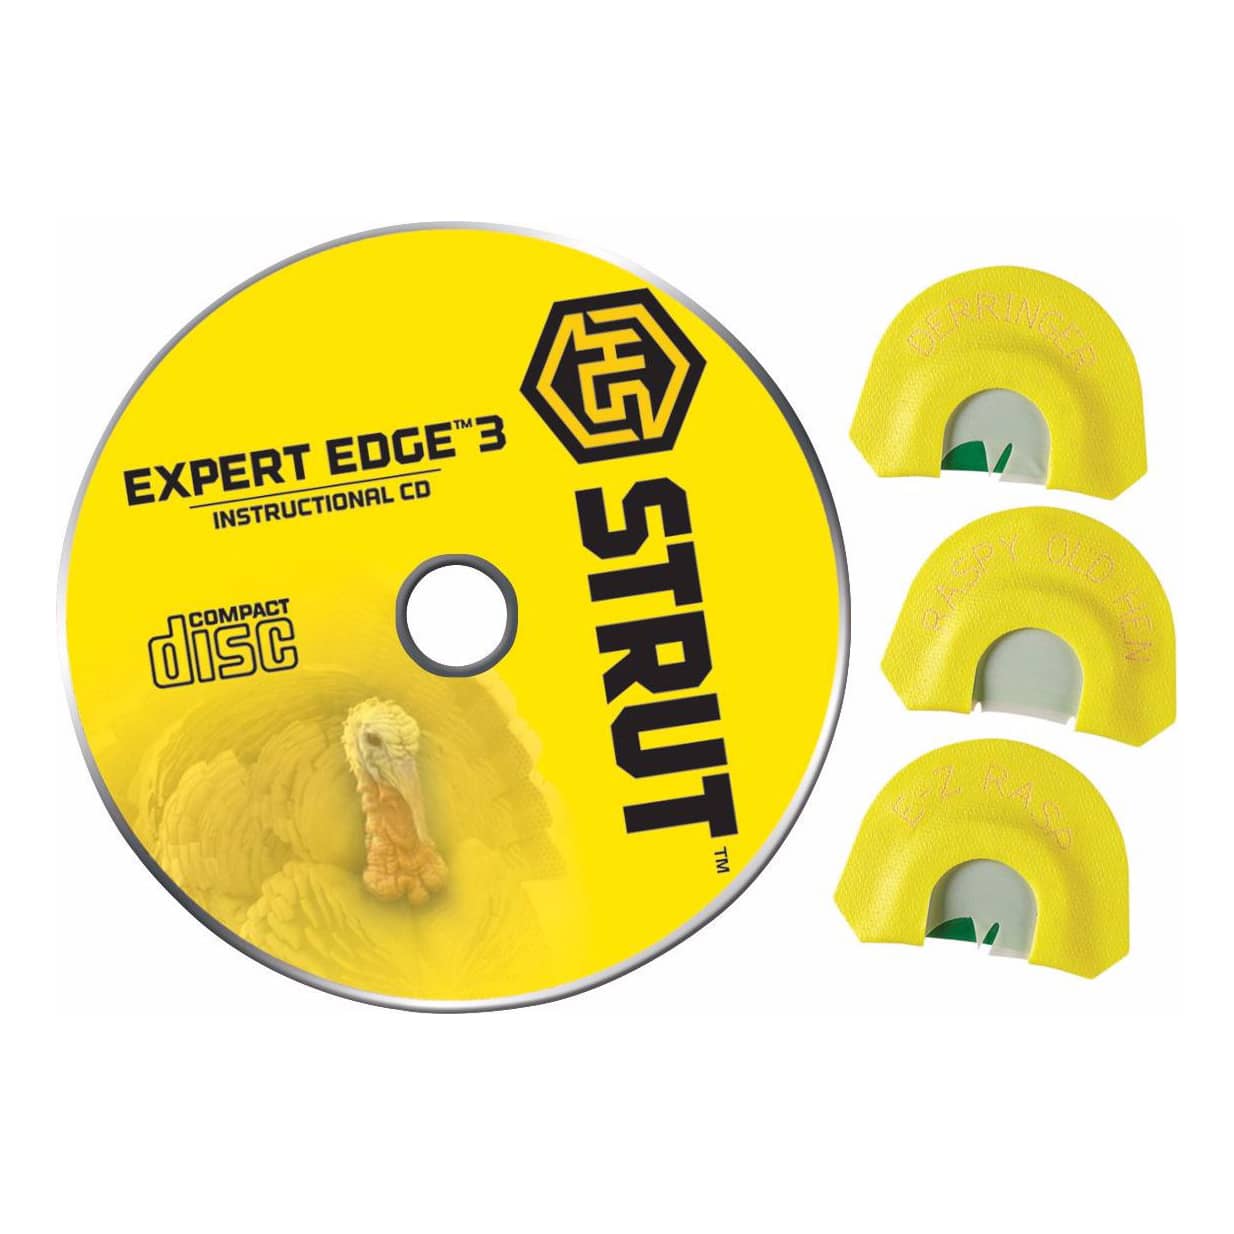 Hunters Specialties® H.S. Strut® Expert Edge™ 3 Mouth Turkey Call Combo